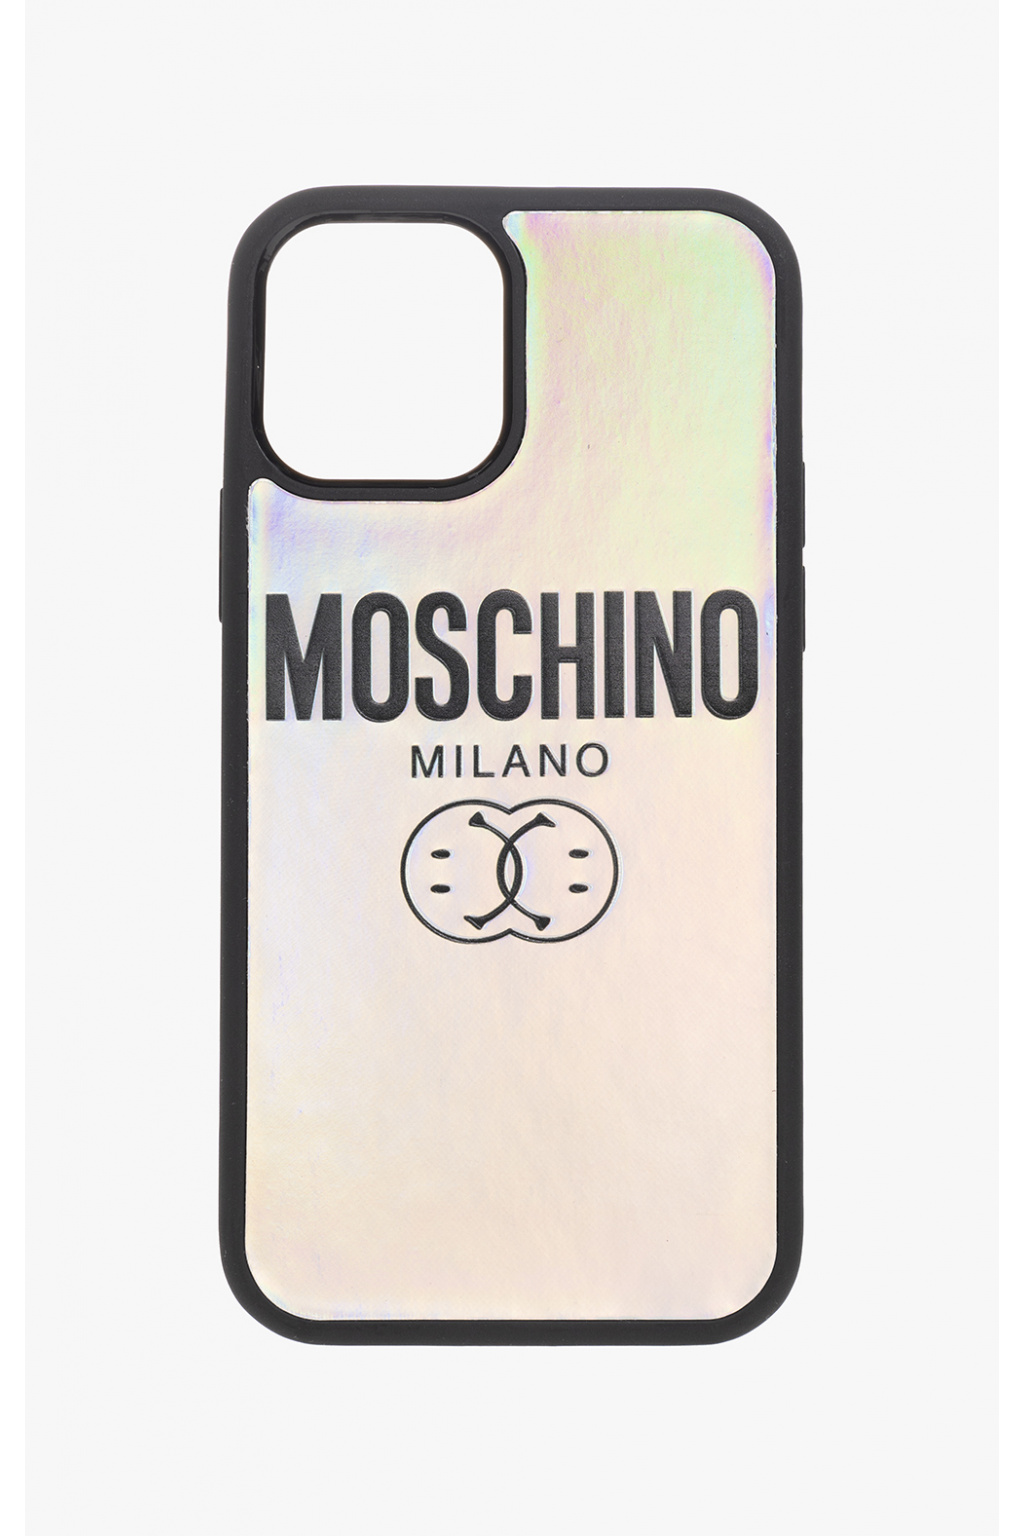 Moschino Check out the most fashionable models®